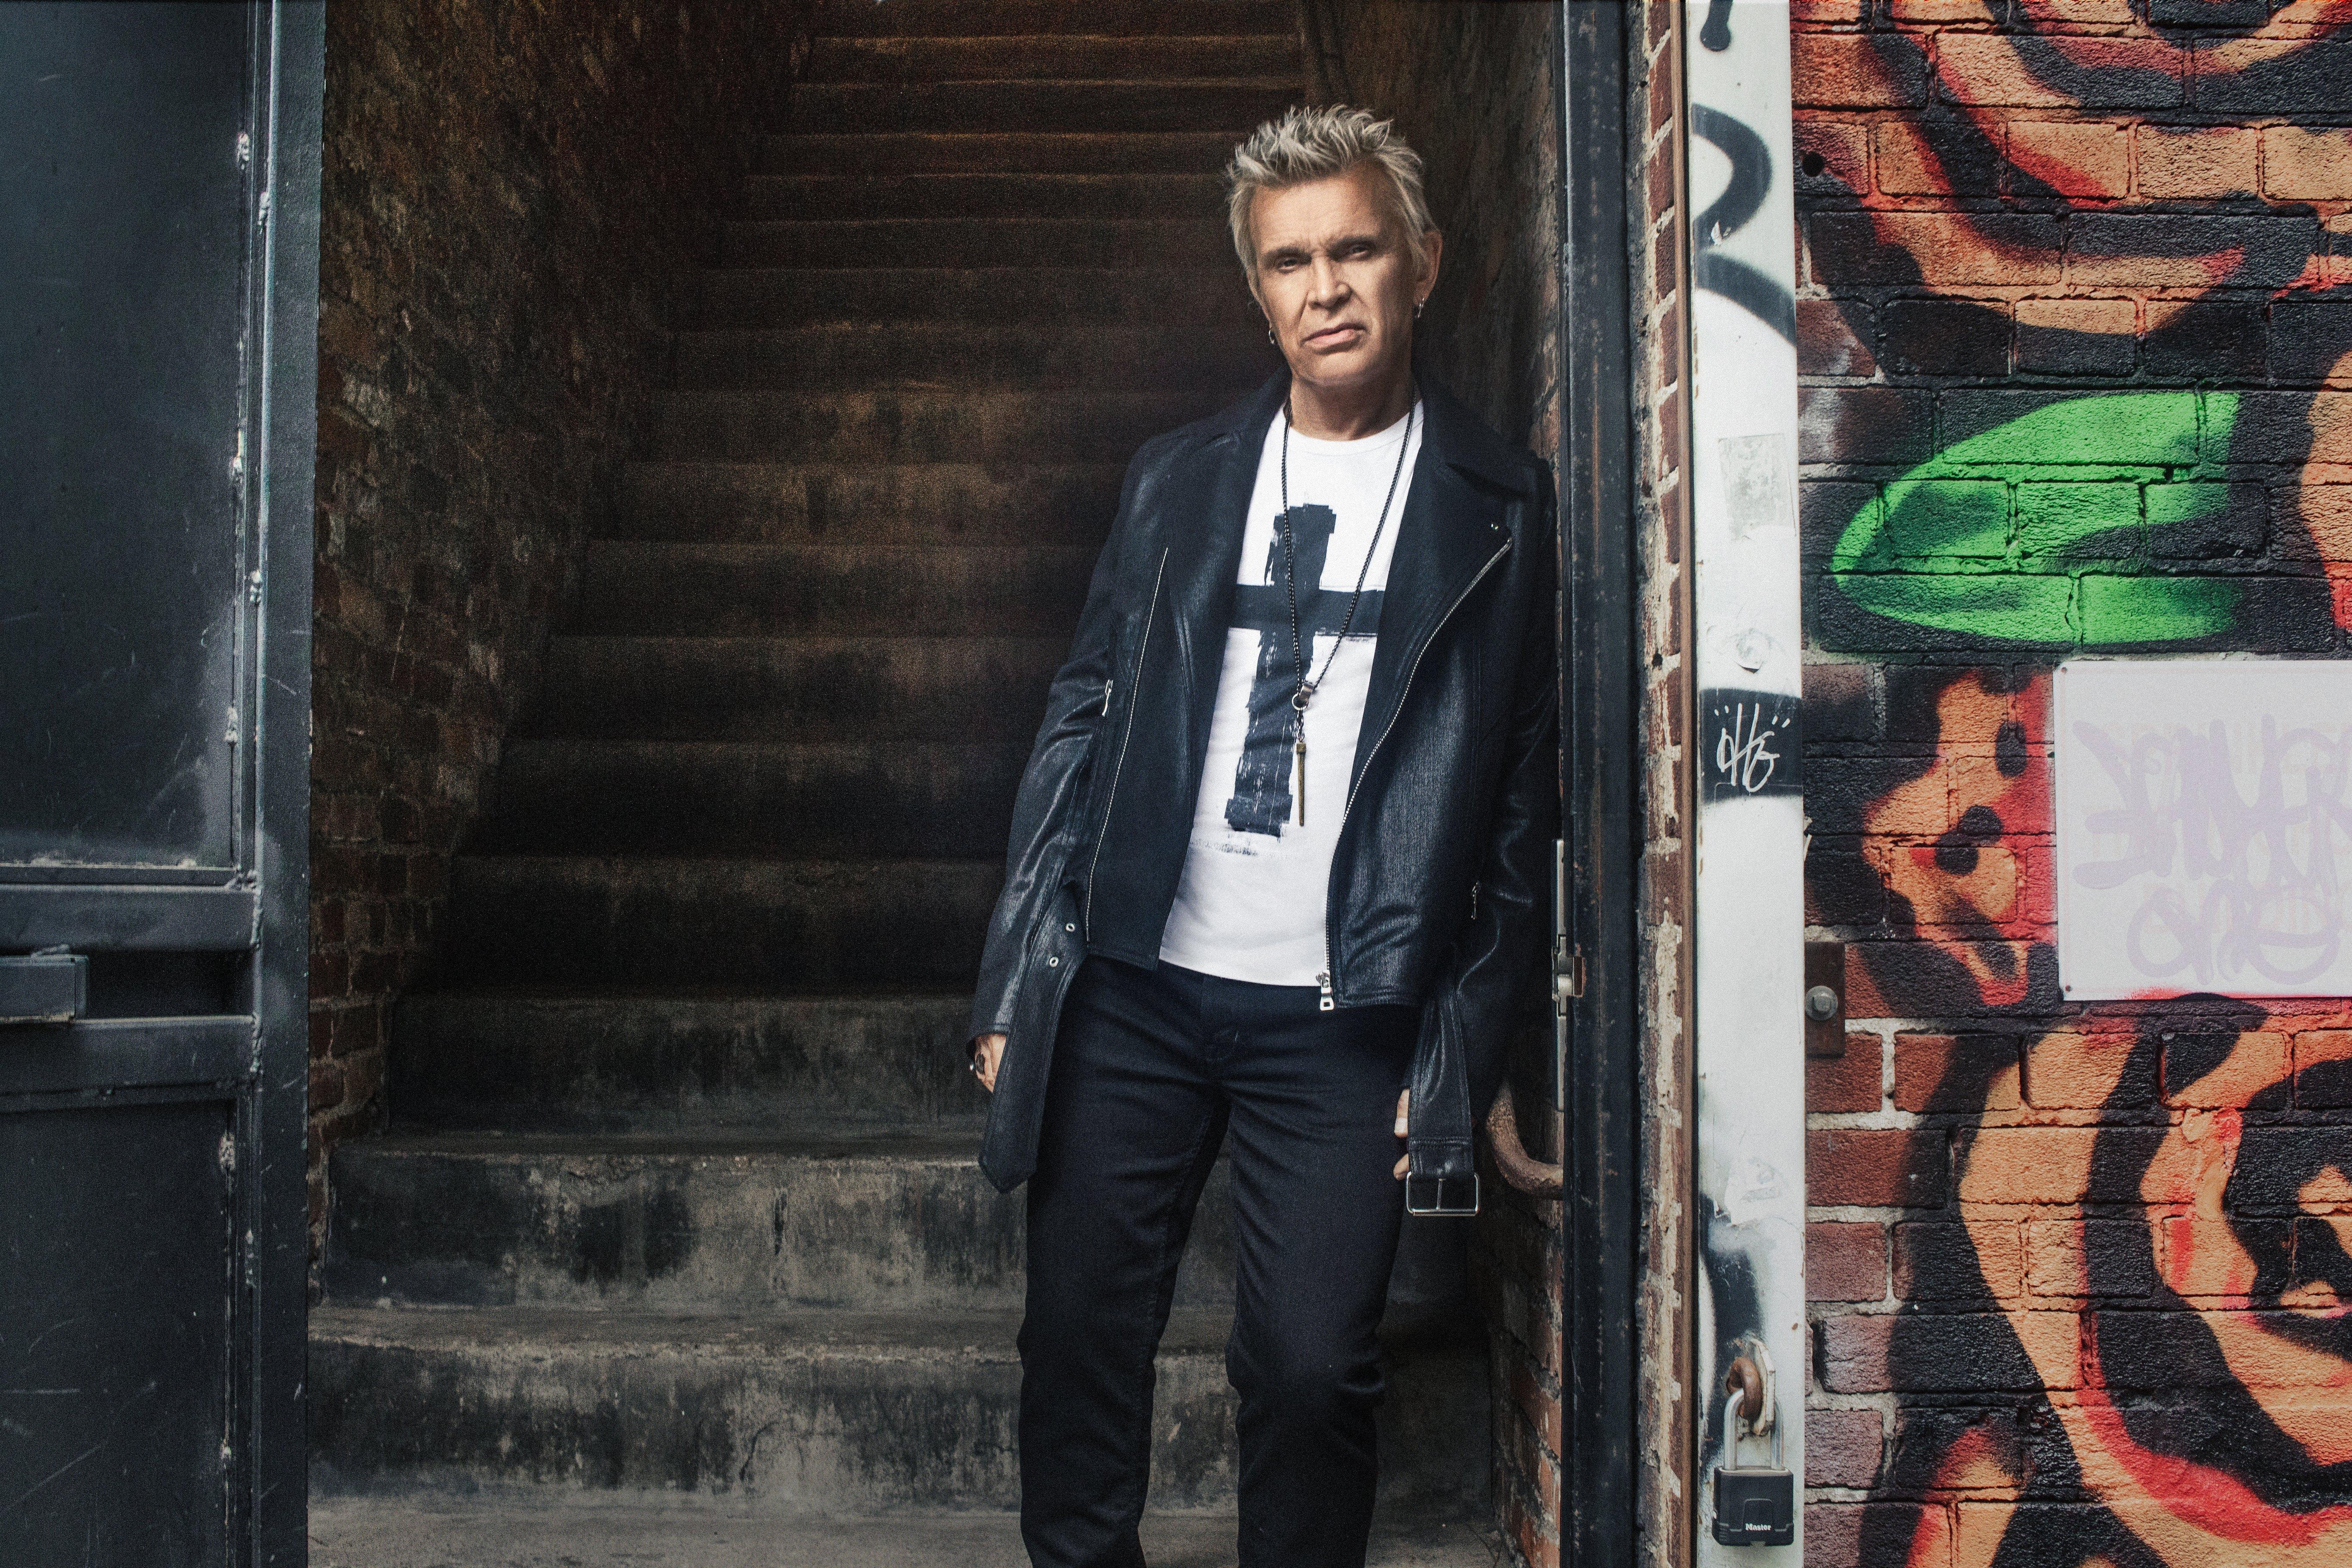 Living Legends Billy Idol On Survival, Revival and Breaking Out Of The Cage GRAMMY image image